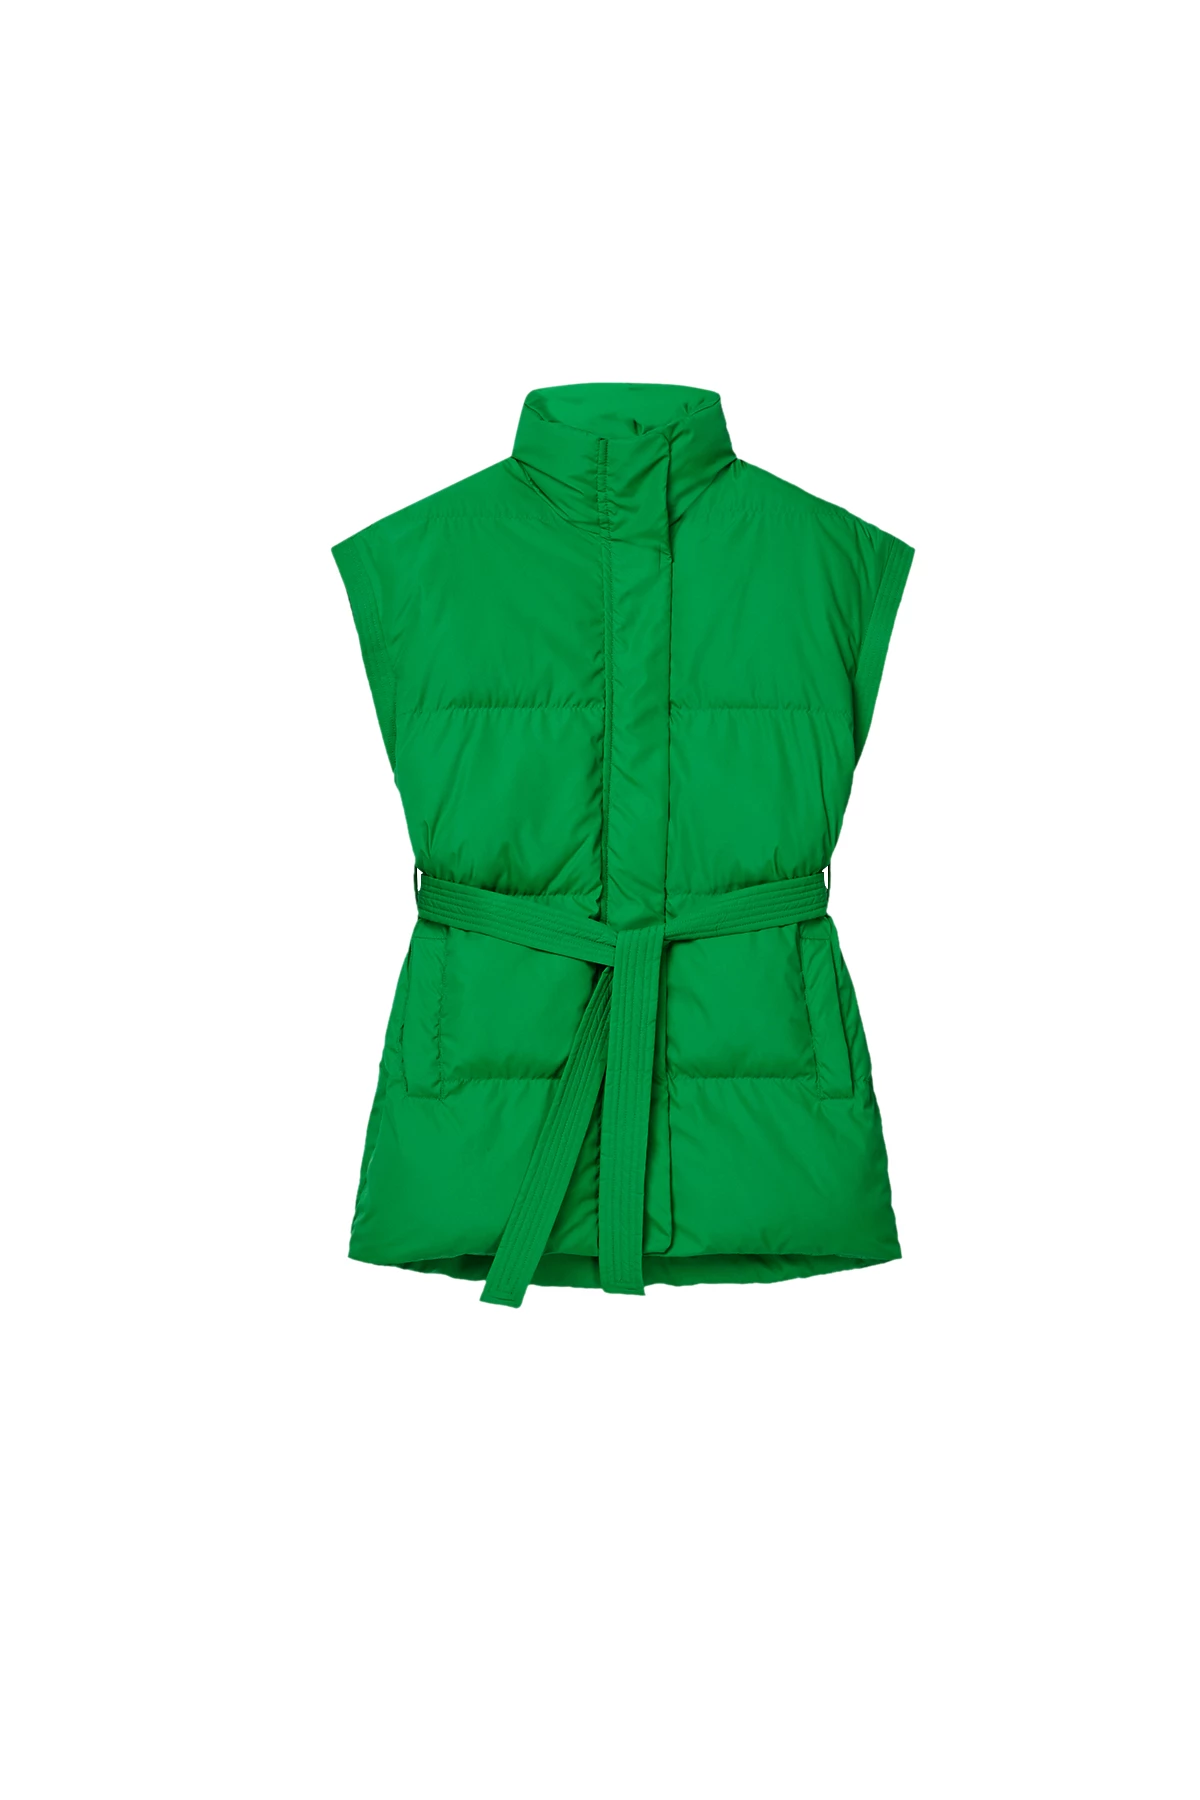 Straight green quilted vest, photo 7